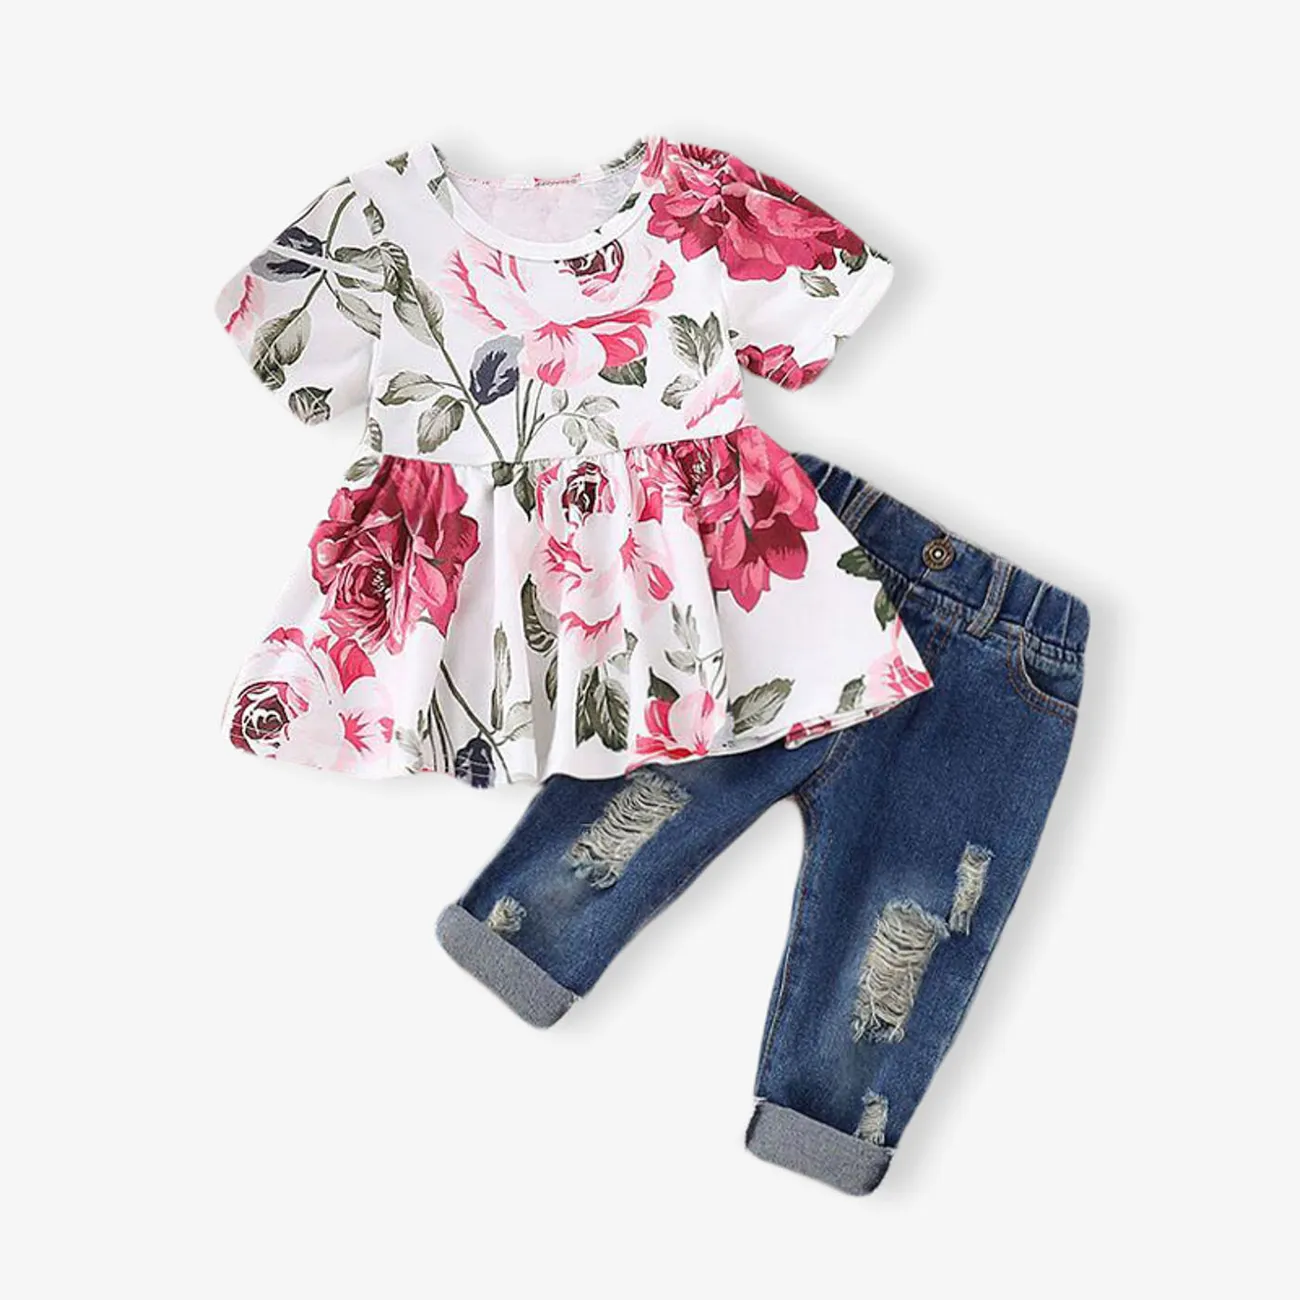 2pcs Baby Girl 95% Cotton Denim Ripped Jeans and Floral Print Short-sleeve Top Set (Loose-fit)  big image 1